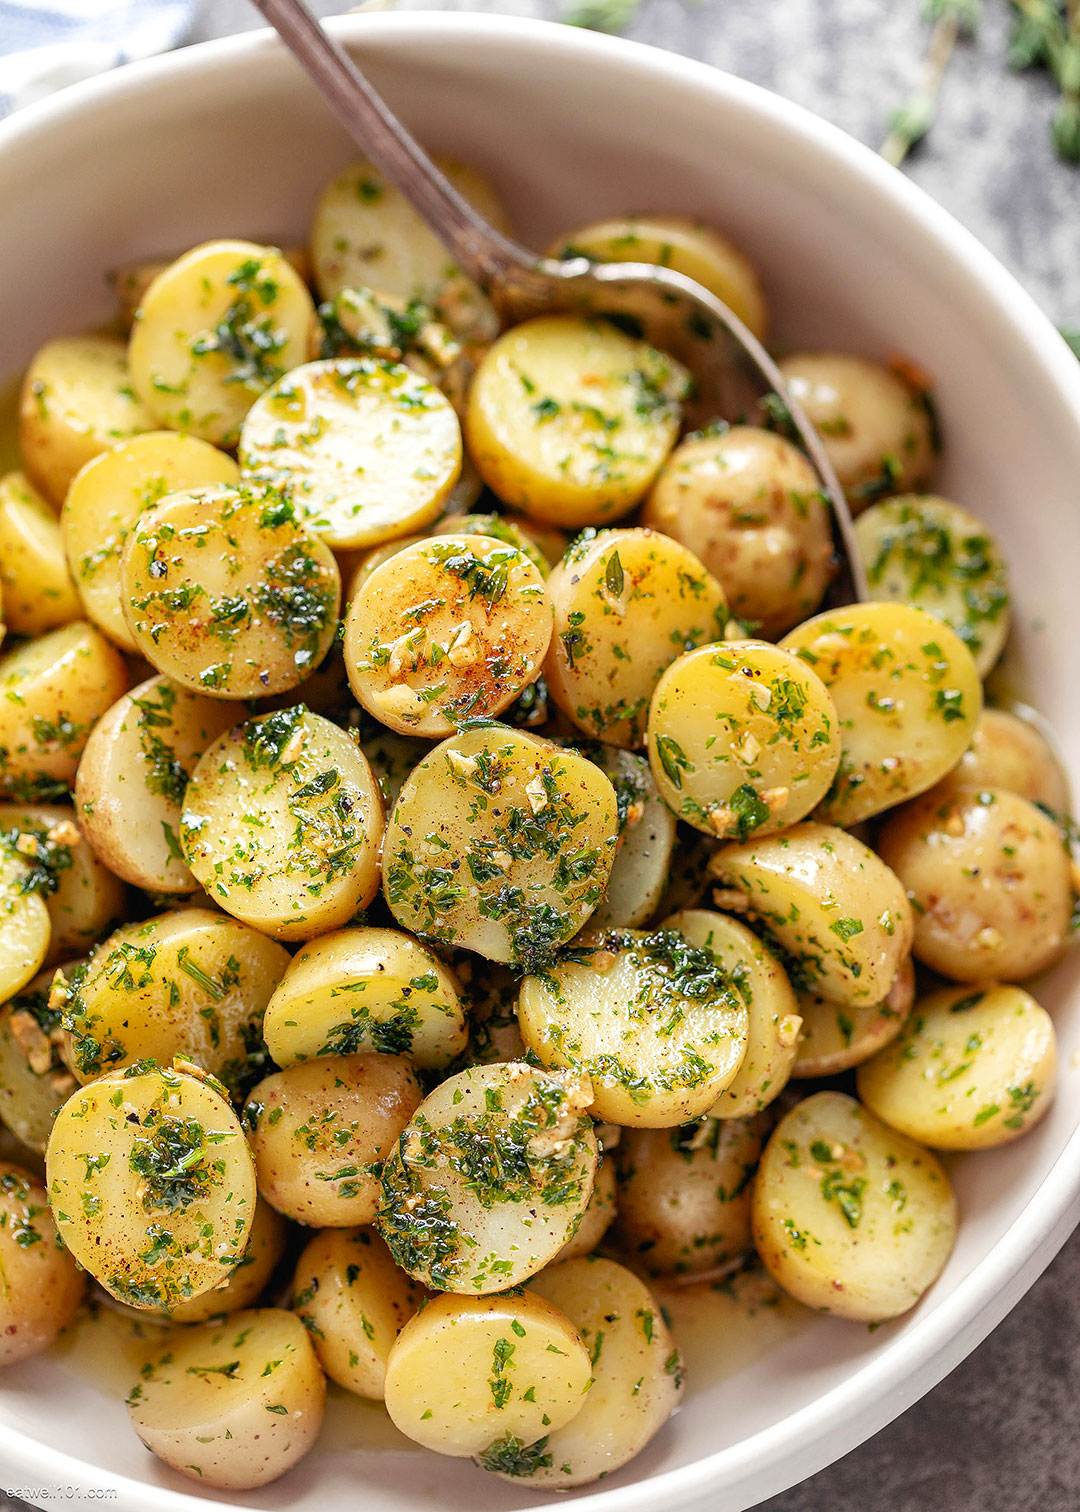 Fried Potatoes Recipe with Garlic Browned Butter – How to cook Baby ...